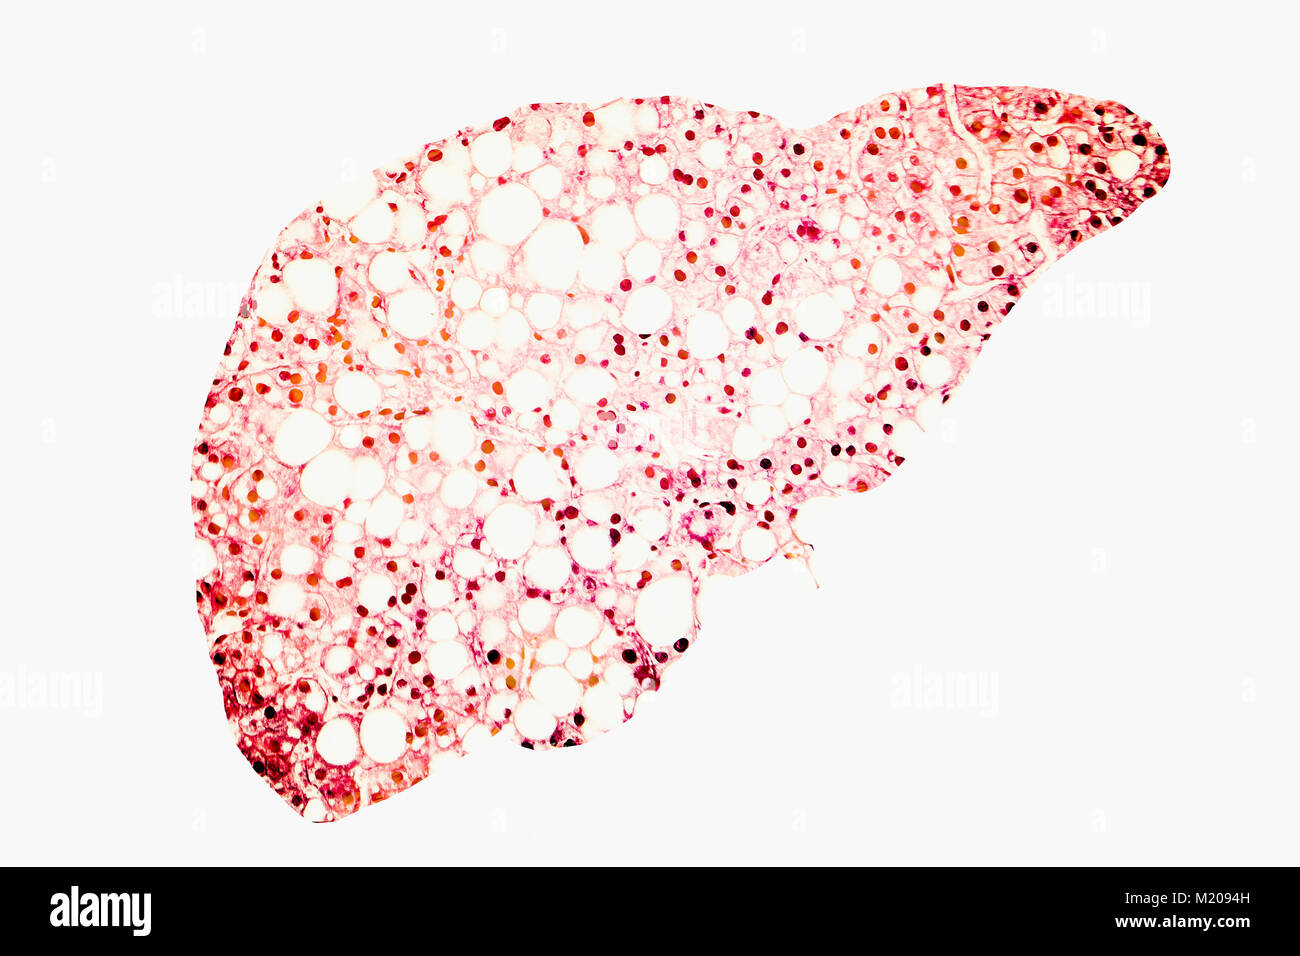 Fatty liver, conceptual illustration. Fatty liver is commonly associated with alcohol or metabolic syndrome (diabetes, hypertension and obesity), but can also be due to any one of many causes. Fatty liver disease is a reversible condition wherein large vacuoles of fat (pale yellow circles) accumulate in liver cells. Stock Photo